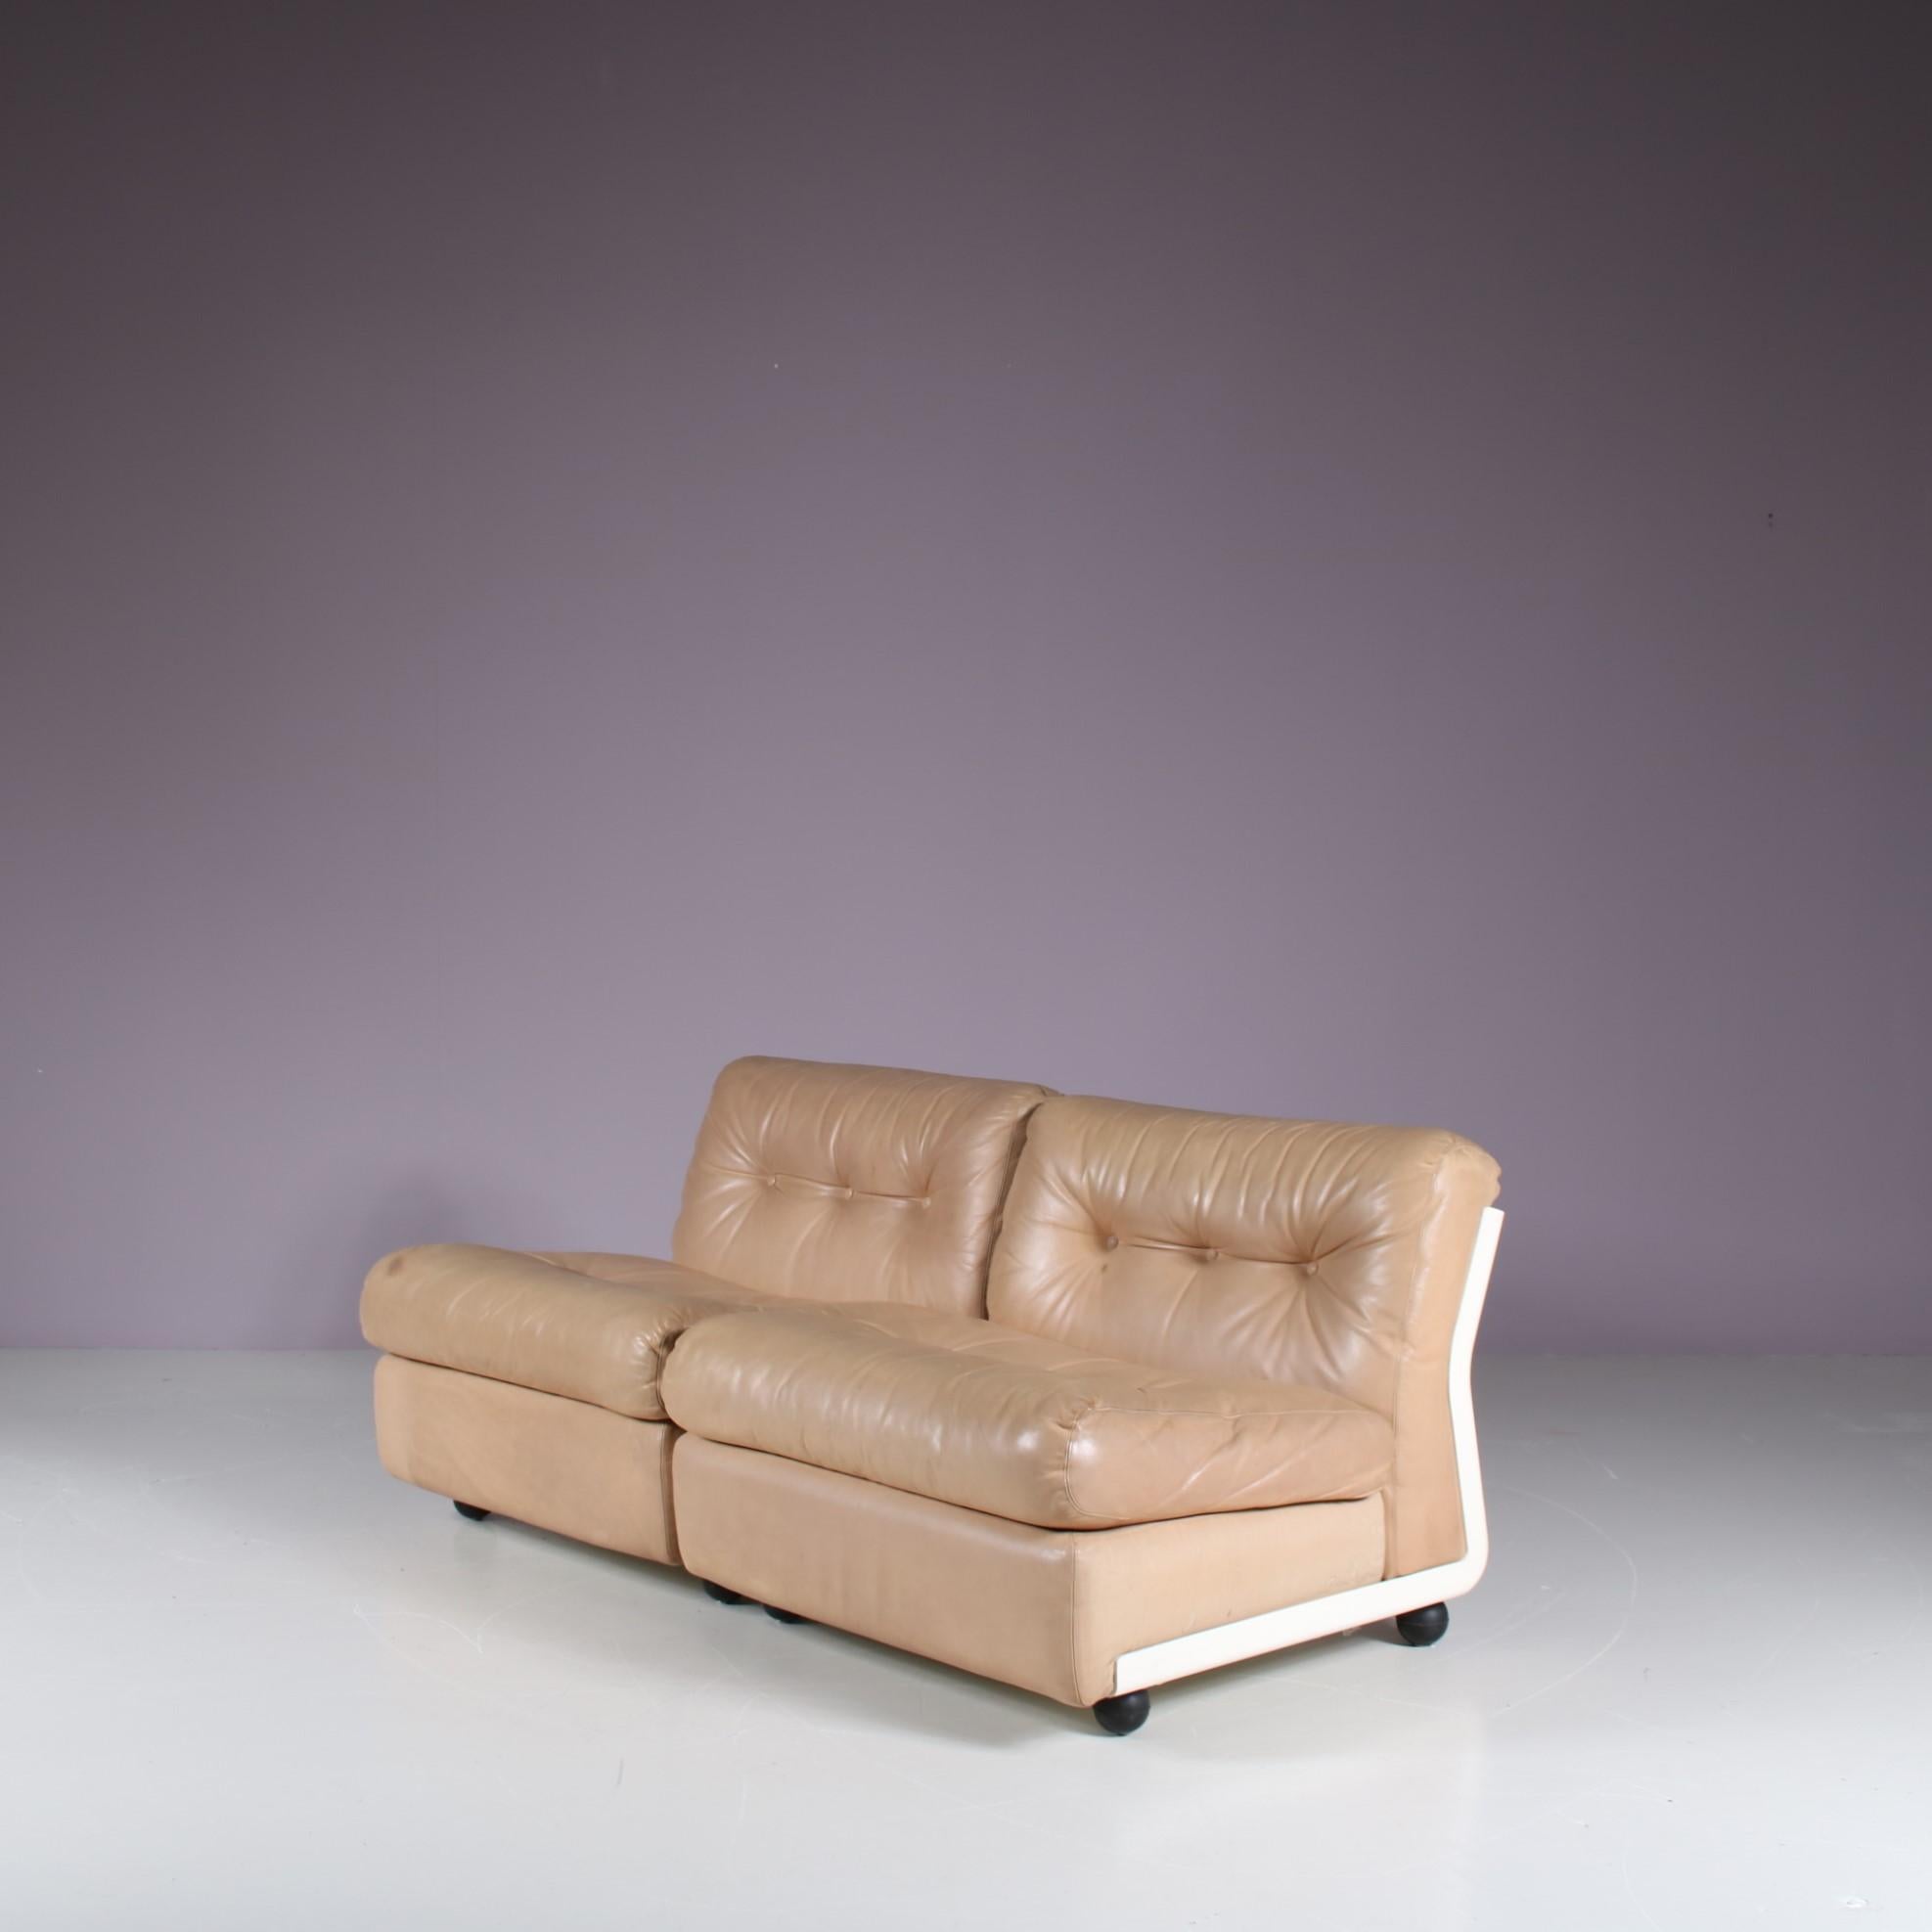 “Amanta” Sectional Sofa by Mario Bellini for C&B Italia, 1960 For Sale 2